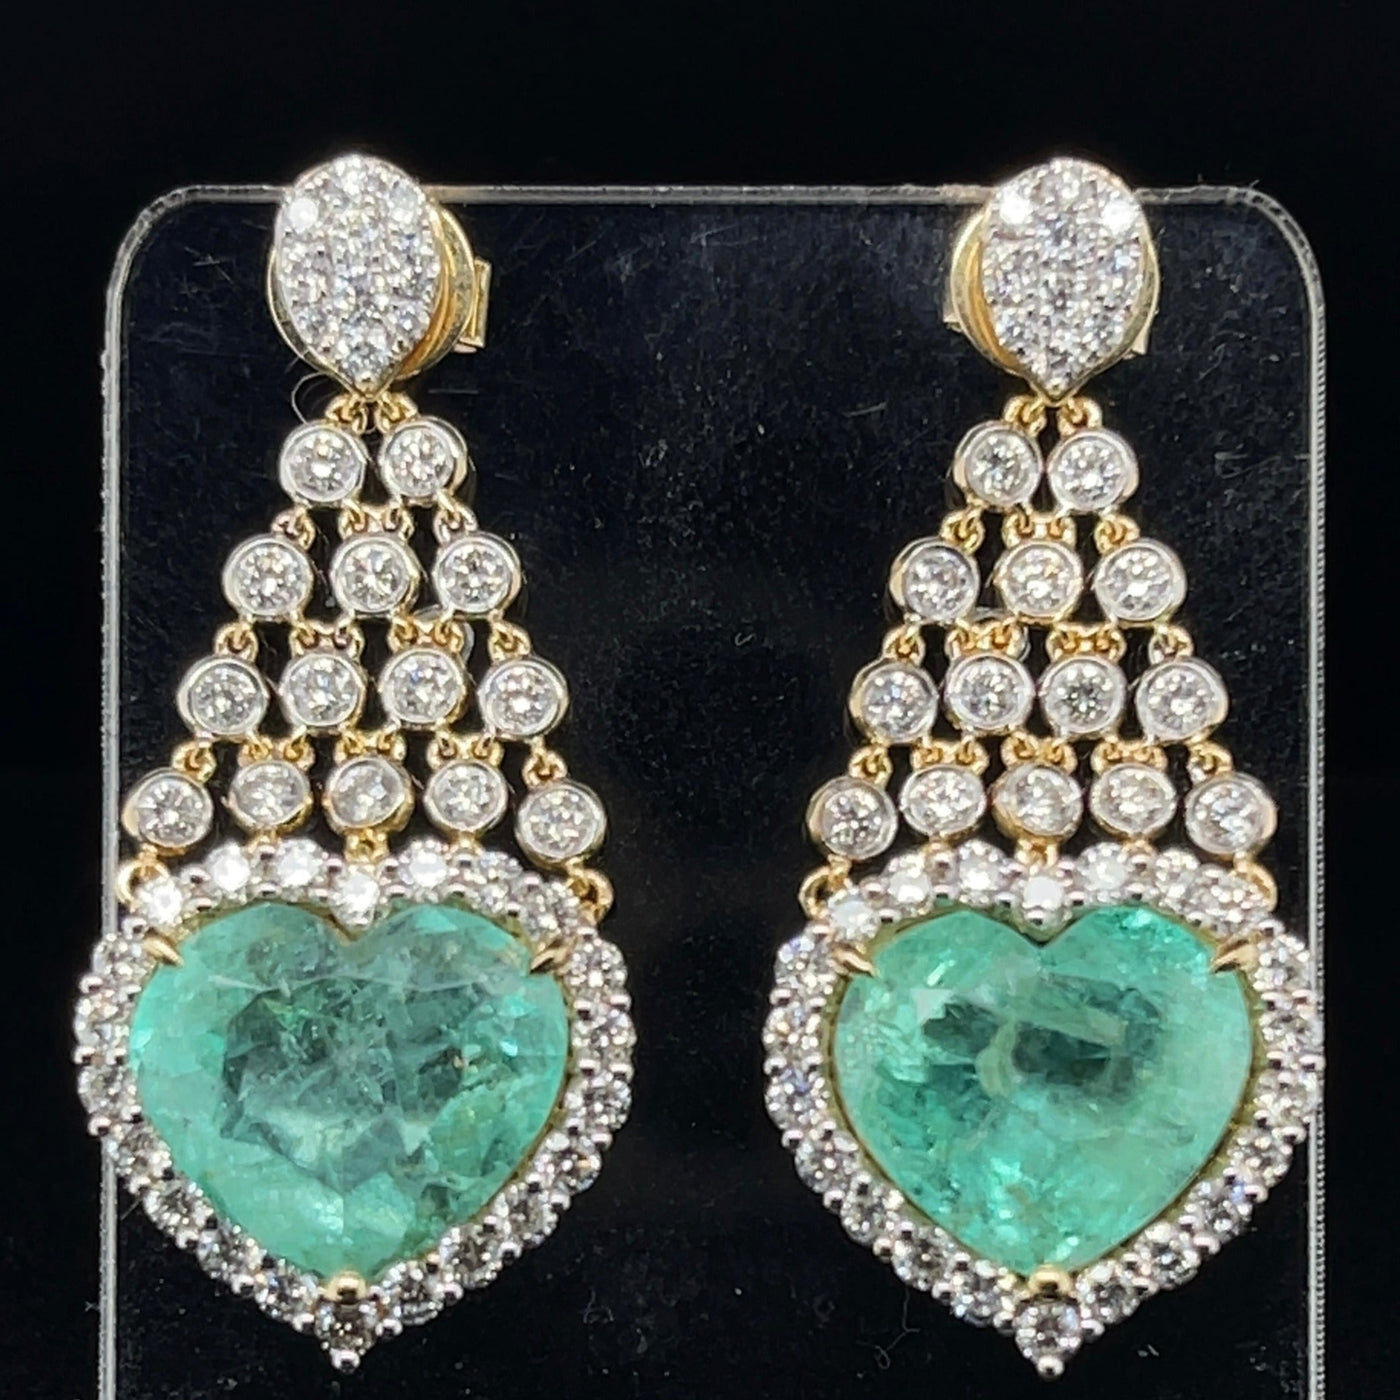 'Heart' 18CT yellow gold colombian emerald and diamond earrings